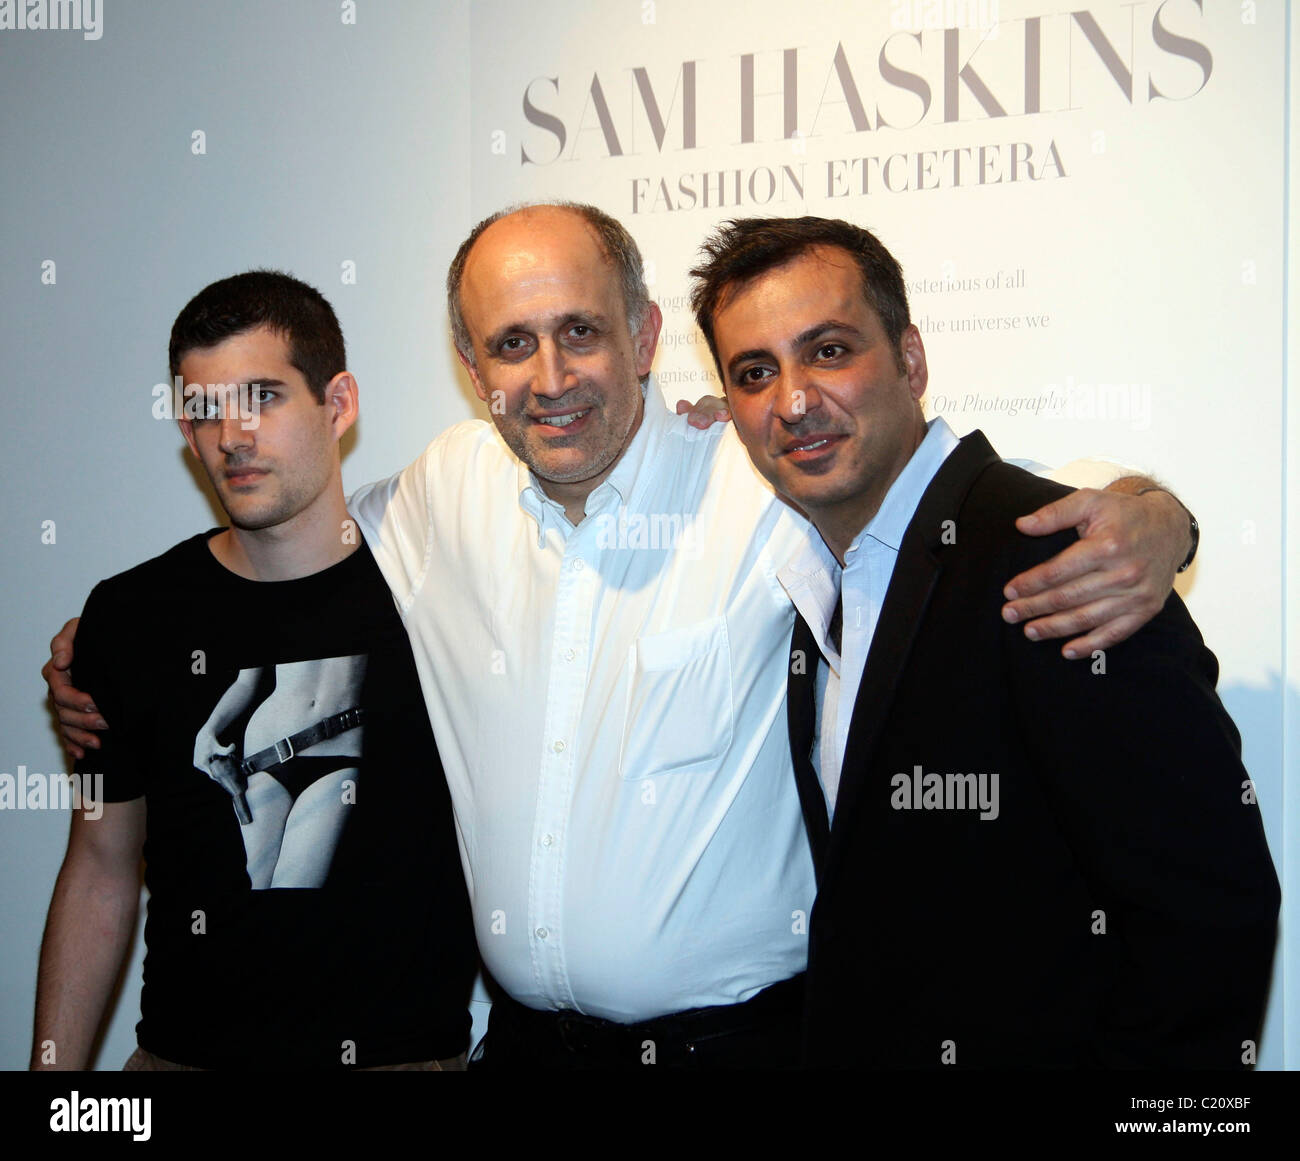 Oren Haskins,  Ludwig Haskins and Mazdek Rassi owner of The Milk Gallery Launch of book project Fashion Etcetera by Sam Haskins Stock Photo